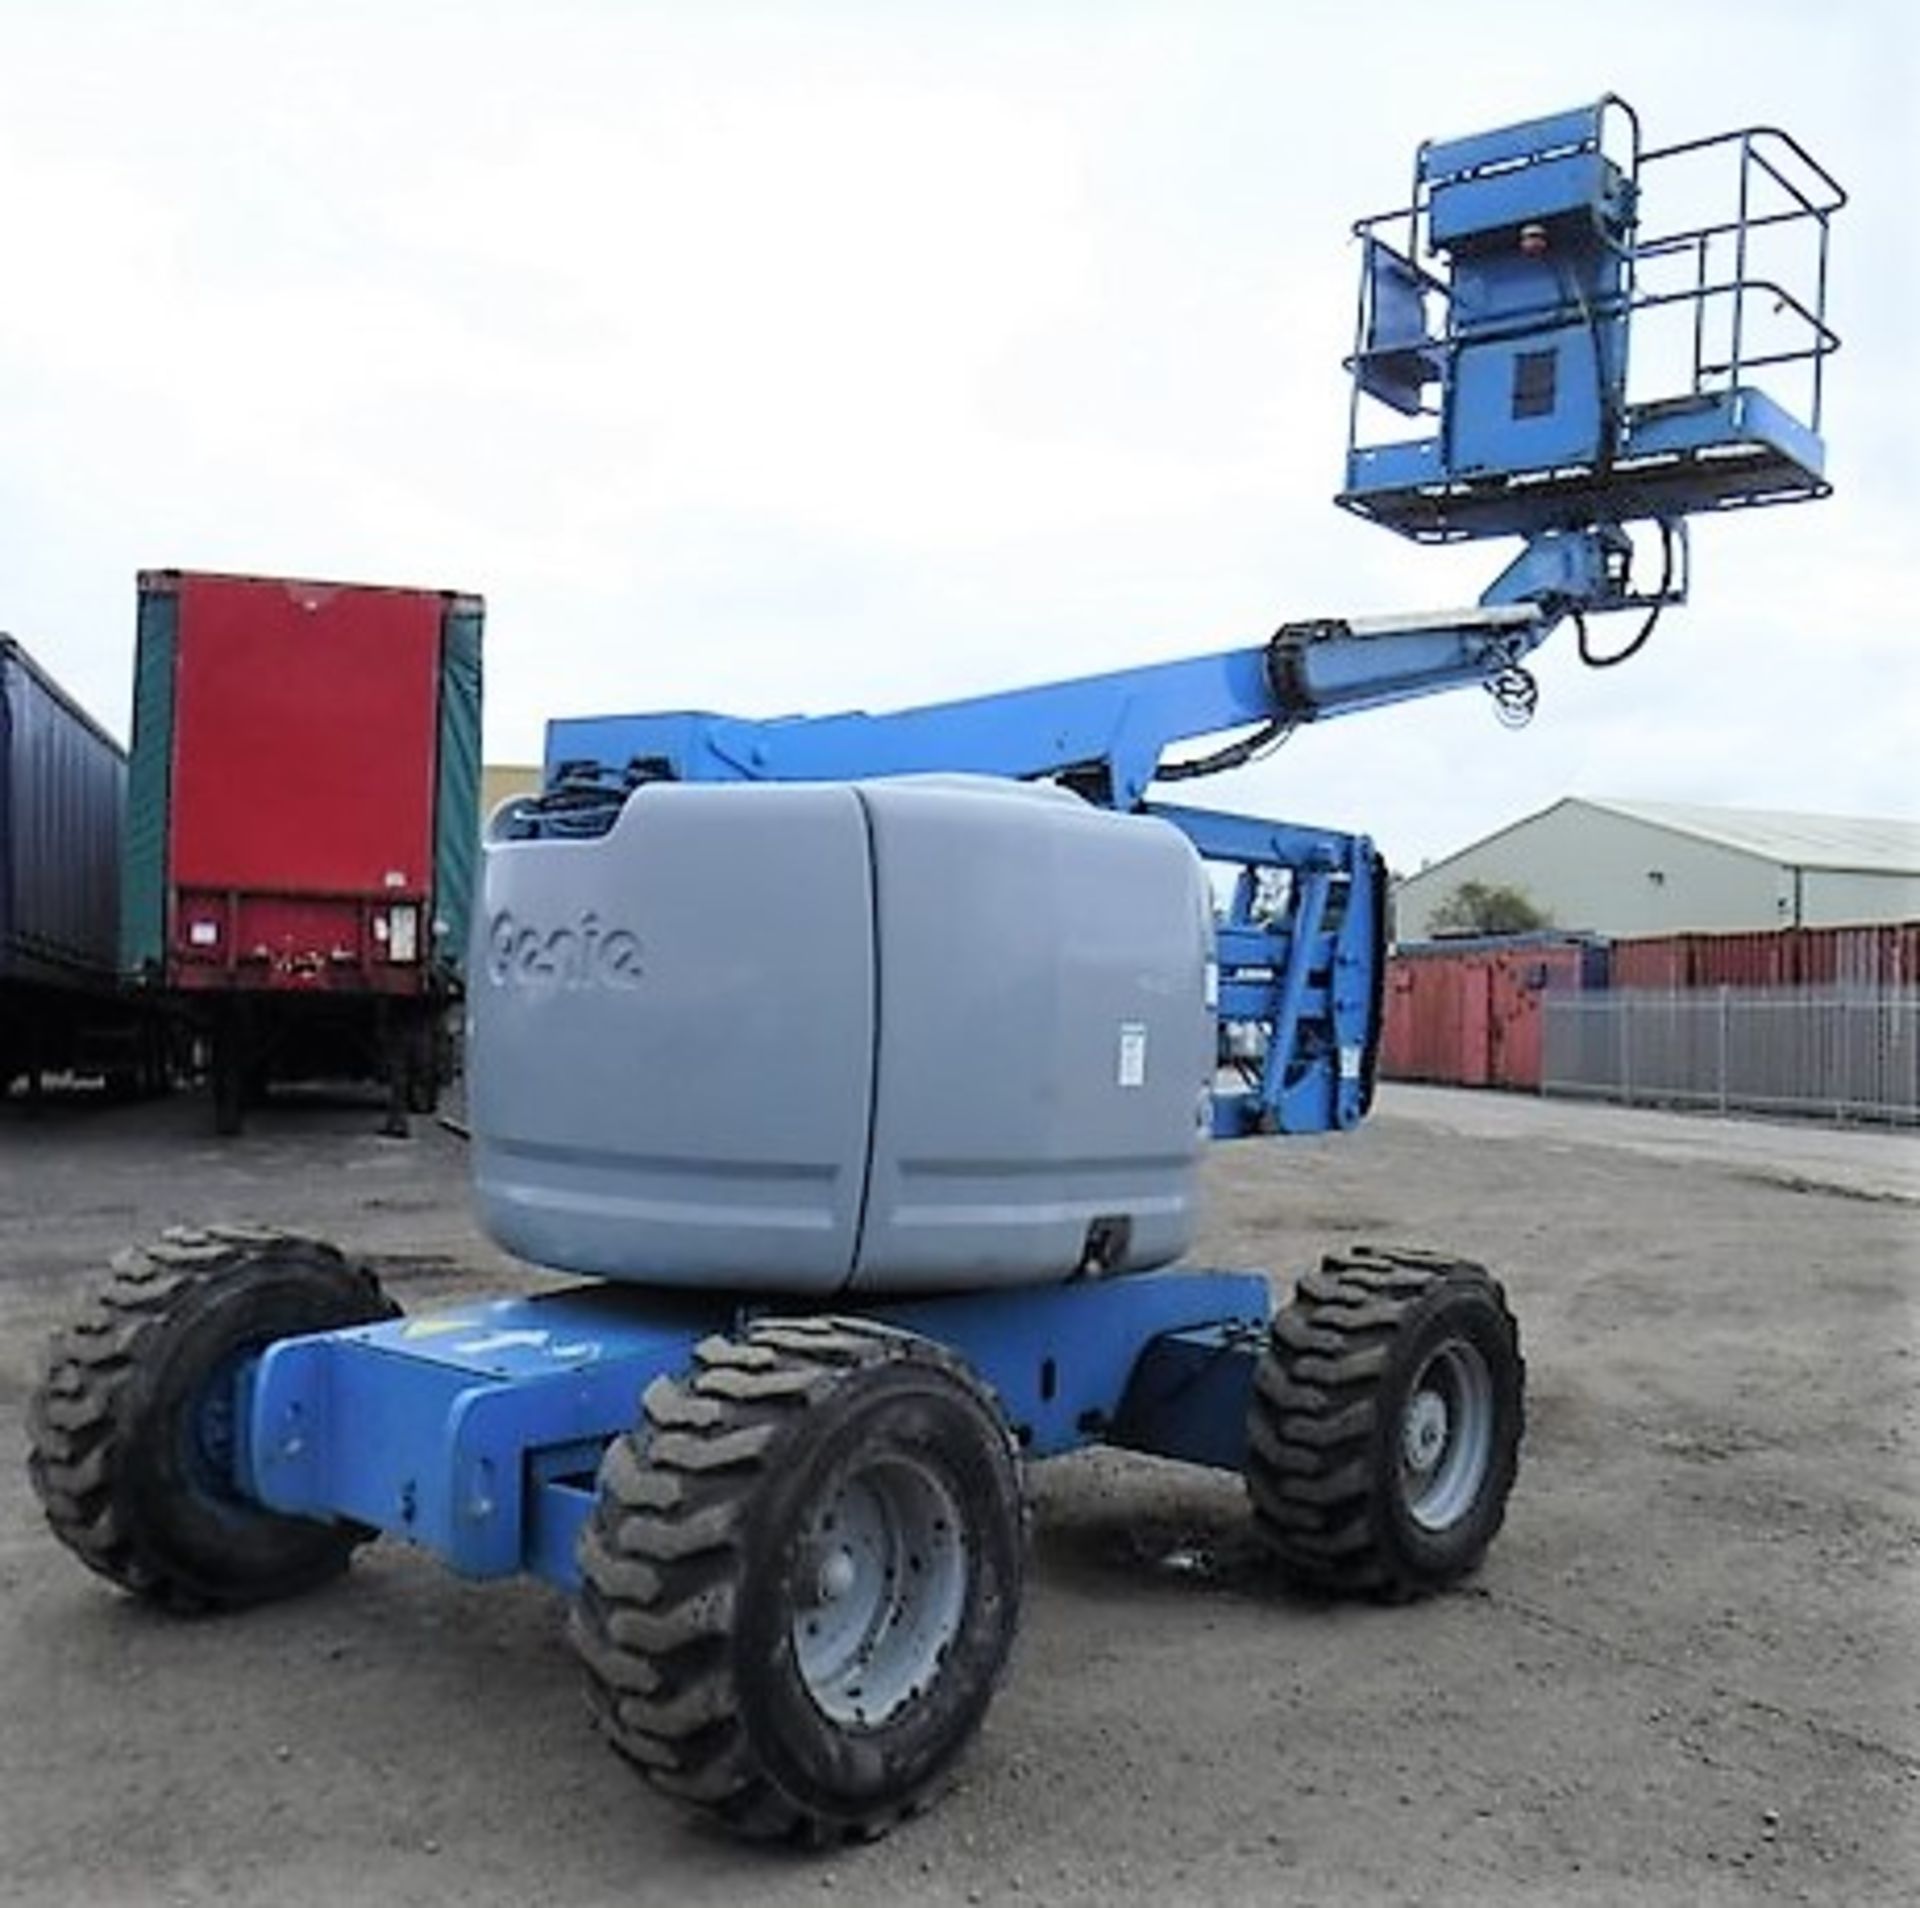 2000 GENIE BOOM LIFT Z45.25. S/N 15155. 8050.5hrs (not verified). Max working height 15.8m, outreach - Image 7 of 28